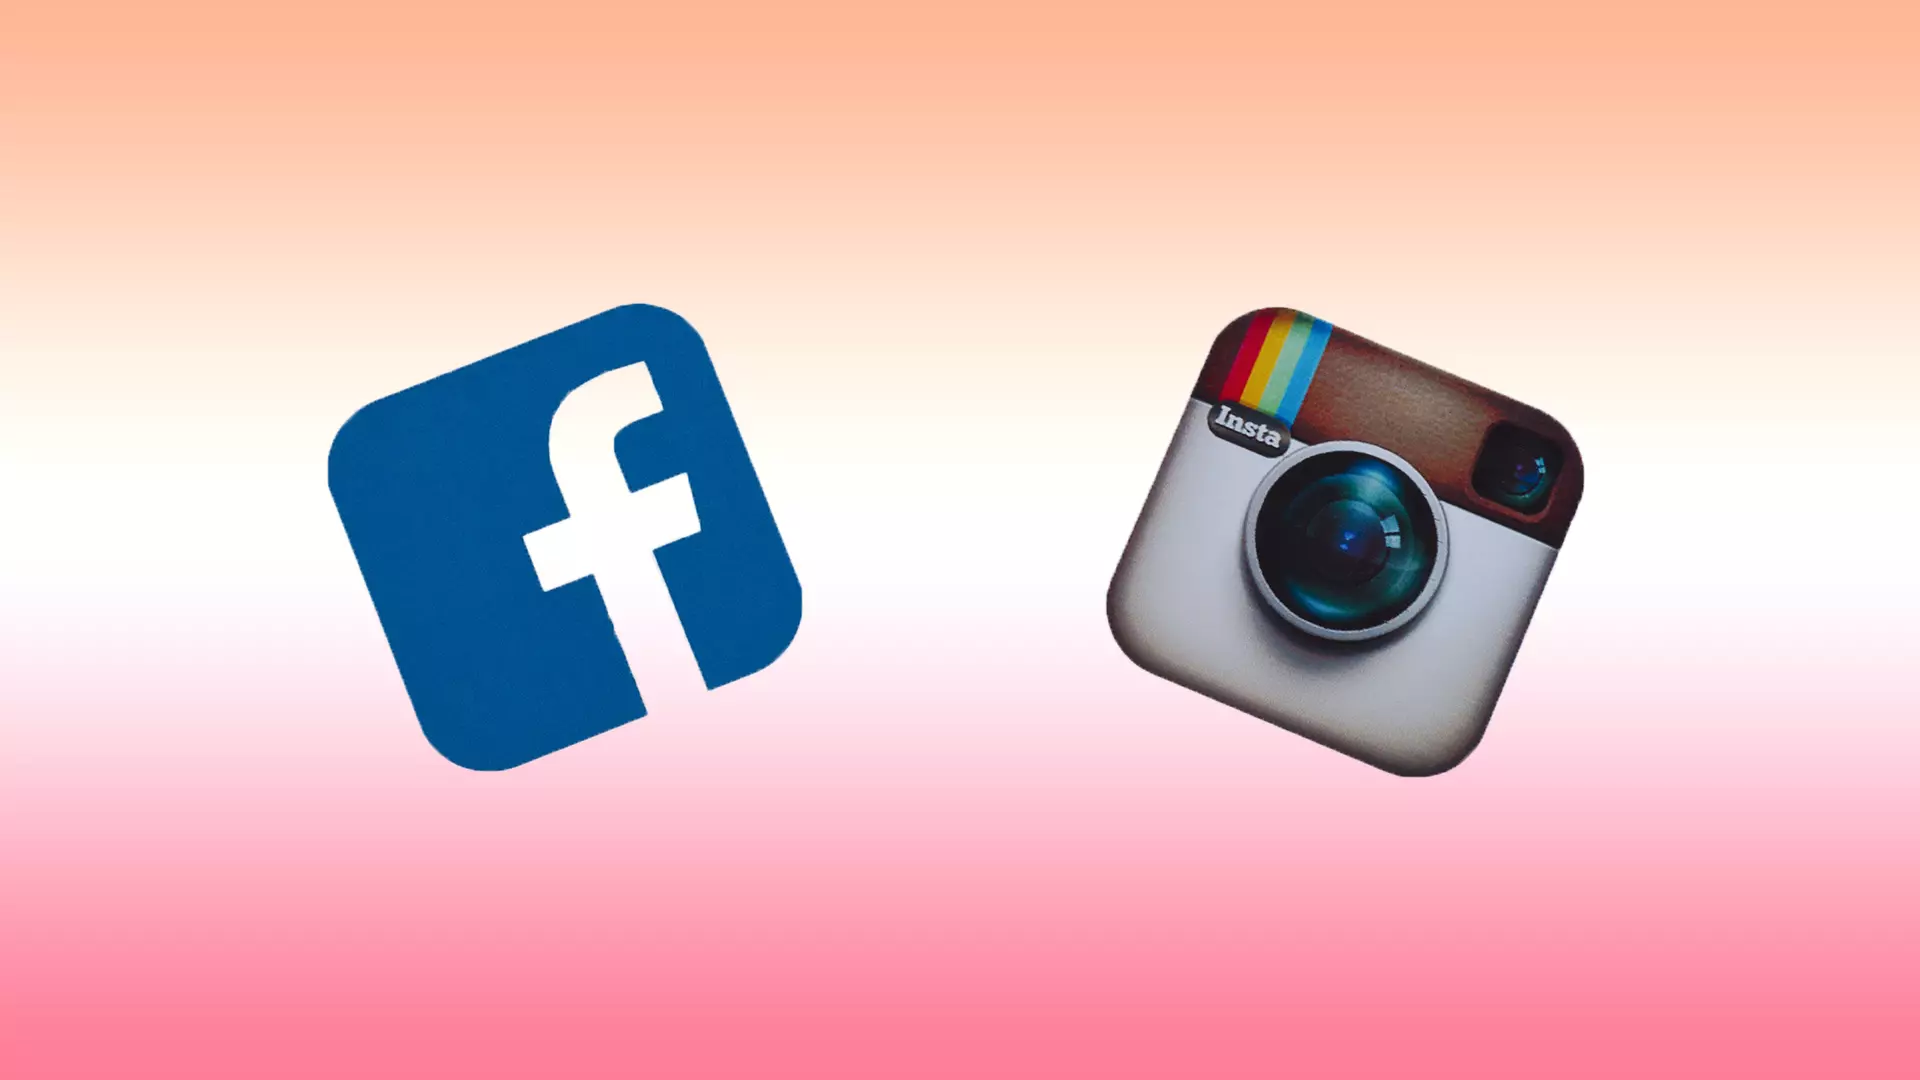 Facebook and Instagram users in the U.S. can now share their NFTs